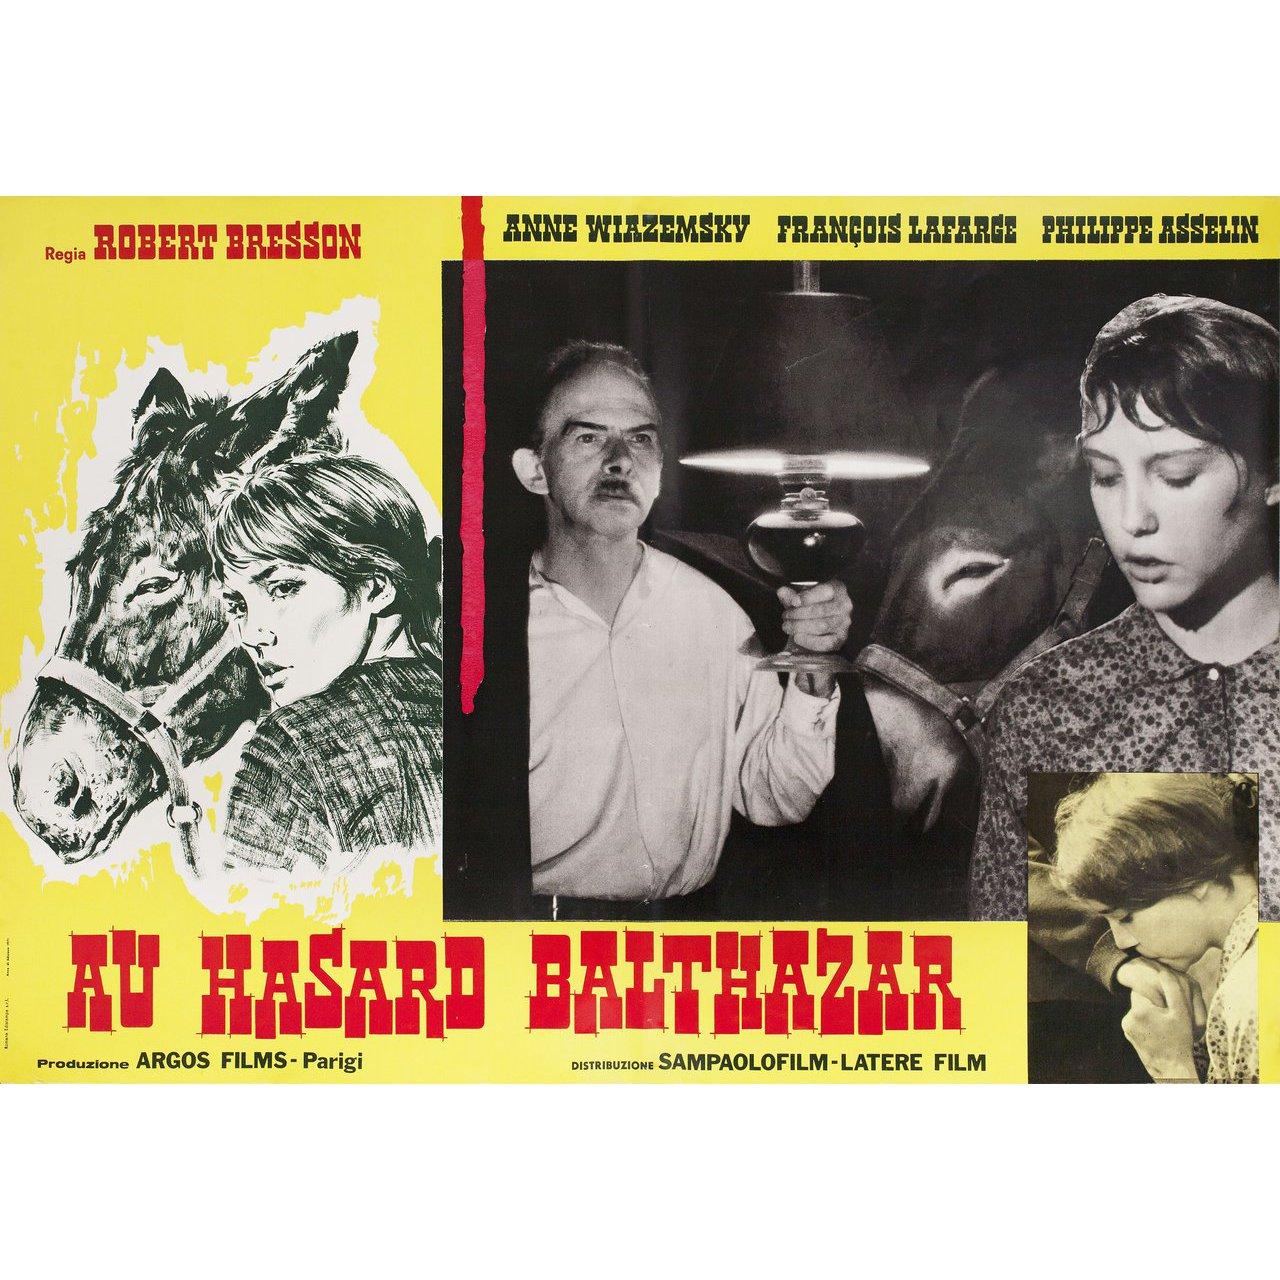 Original 1971 Italian fotobusta poster for the first Italian theatrical release of the 1966 film 'Au Hasard Balthazar' directed by Robert Bresson with Anne Wiazemsky / Walter Green / Francois Lafarge / Jean-Claude Guilbert. Very good-fine condition,